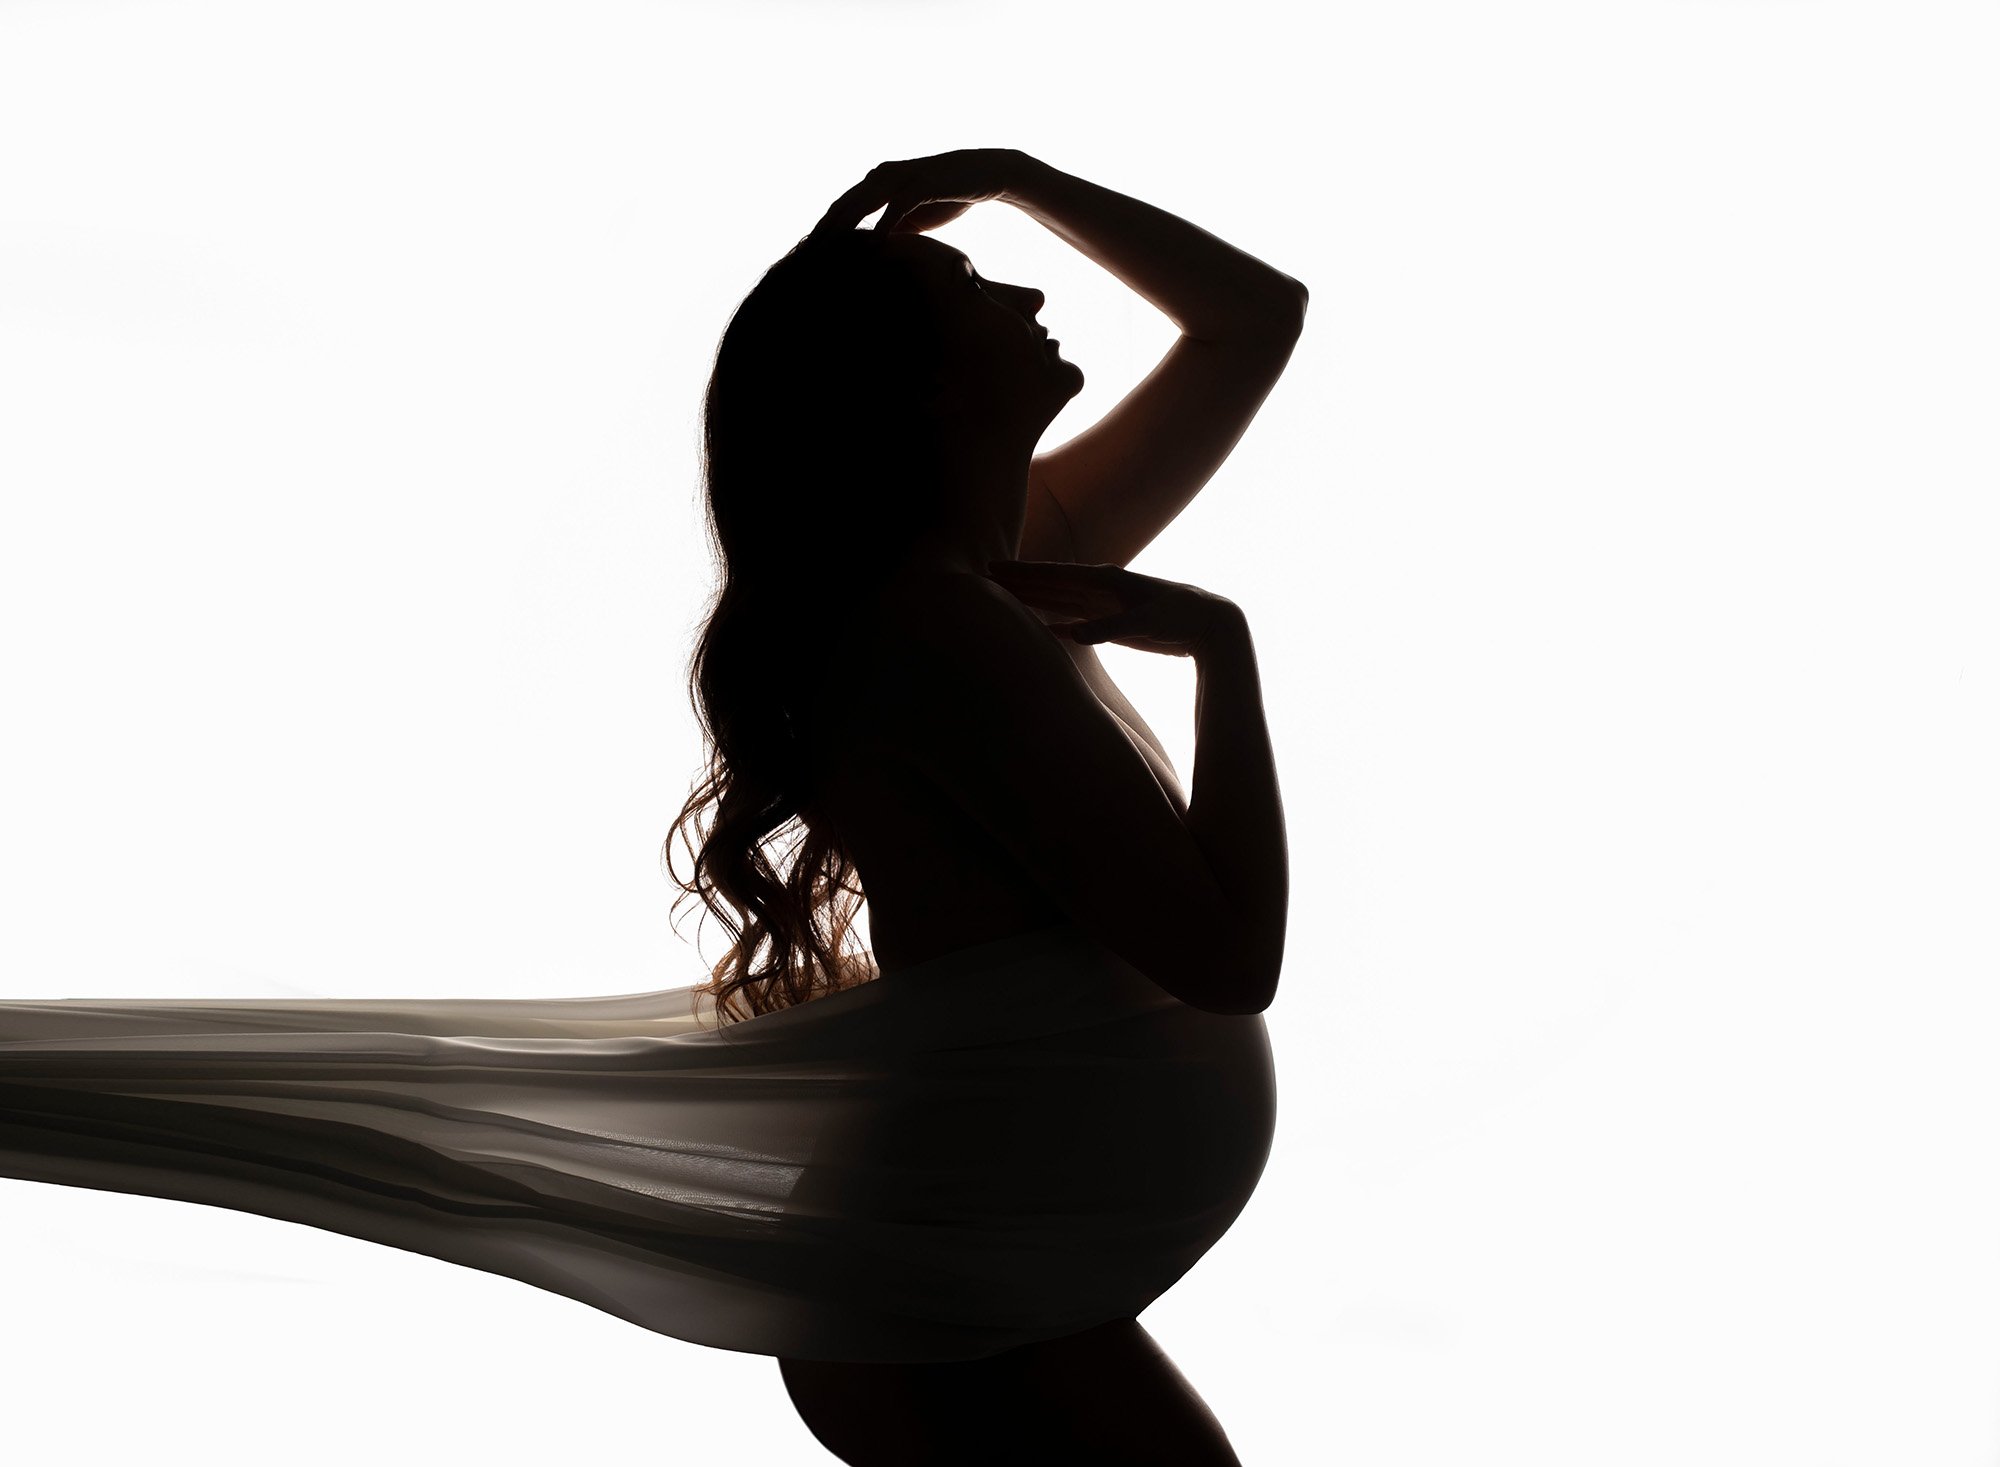 shadow of a pregnant woman on a white background wearing a flowy dress